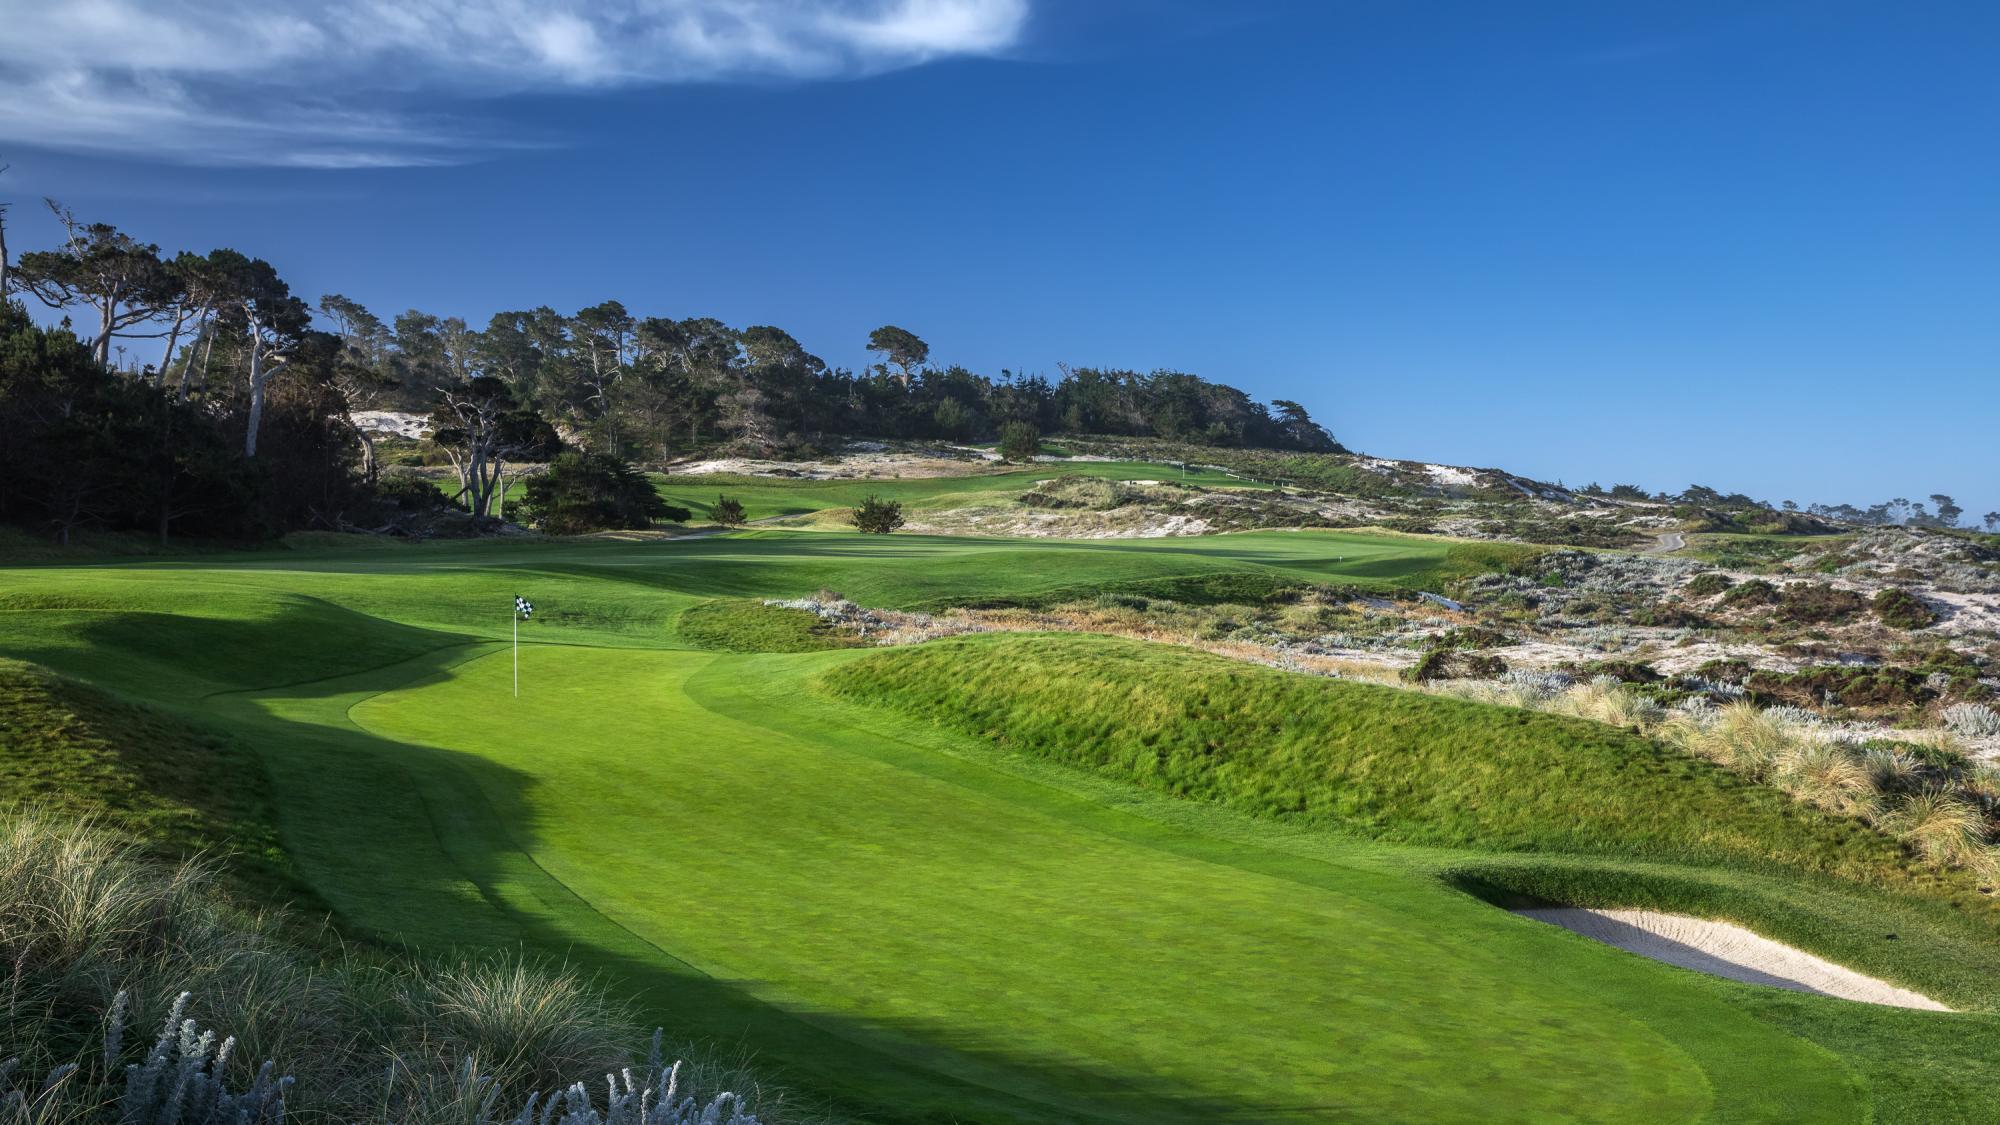 All The Spyglass Hill Golf Course's impressive golf course situated in gorgeous California.